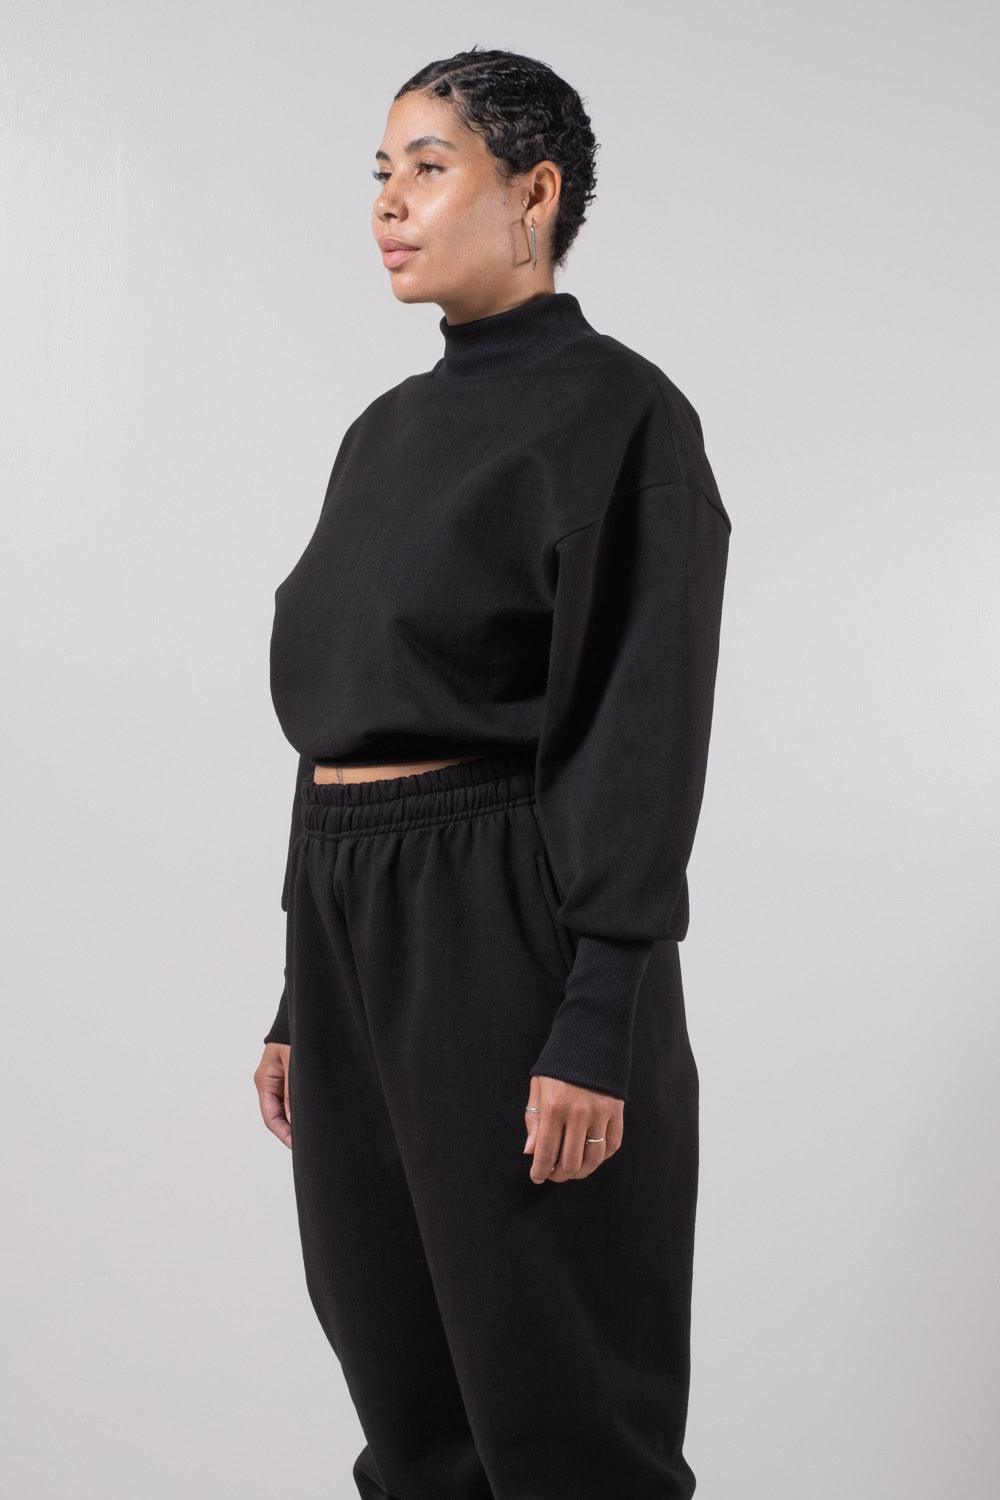 FORM CROPPED CREWNECK - MERCY HOUSE